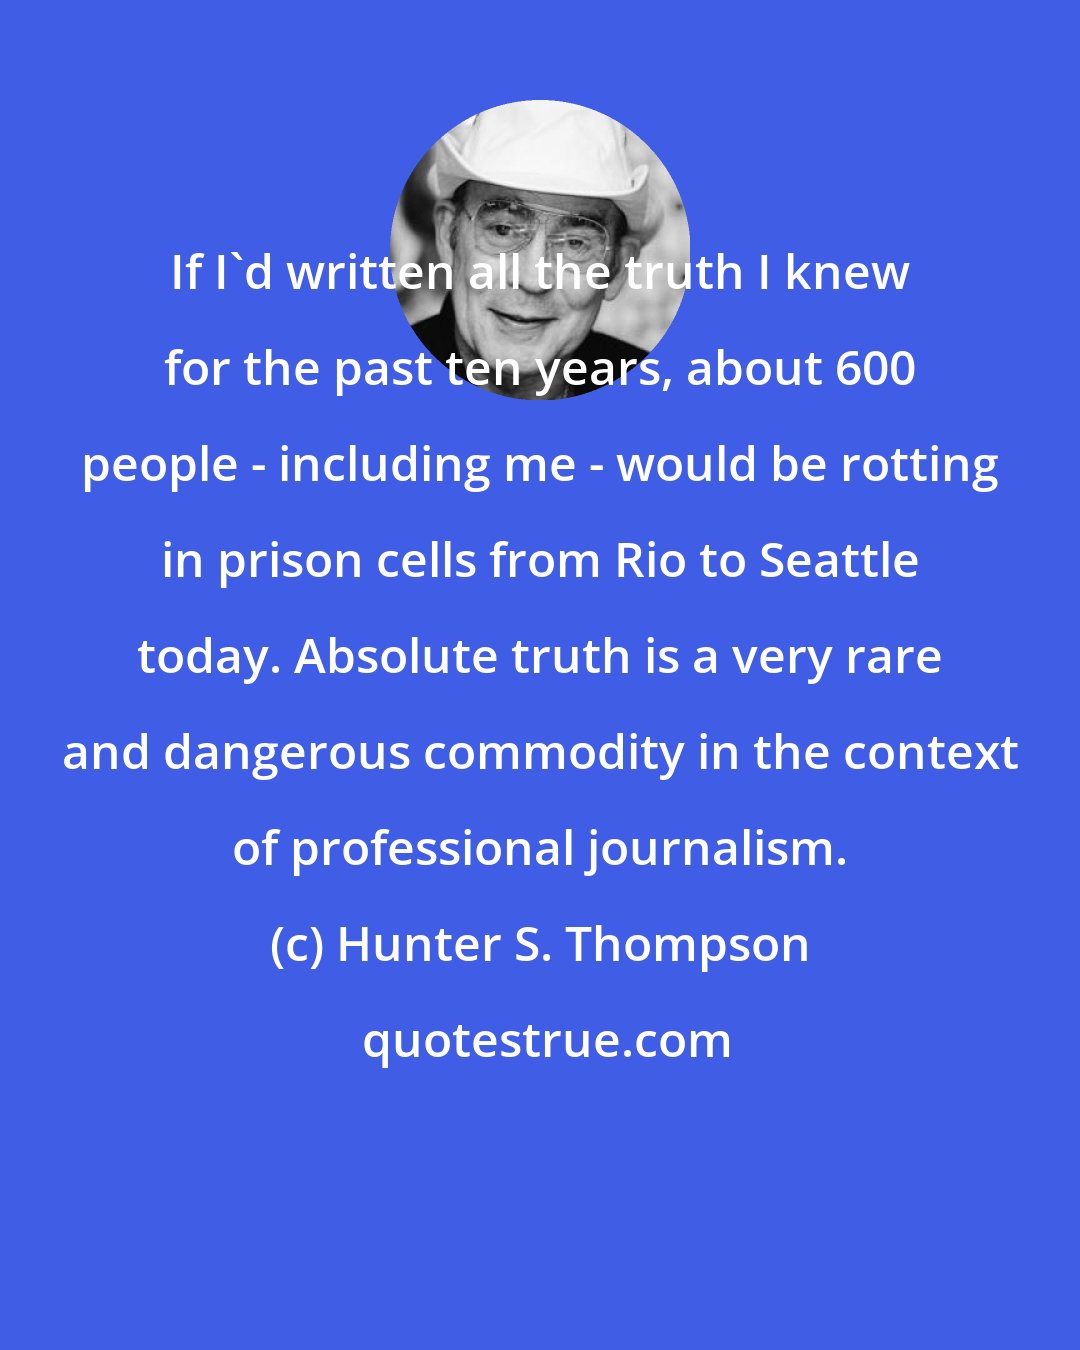 Hunter S. Thompson: If I'd written all the truth I knew for the past ten years, about 600 people - including me - would be rotting in prison cells from Rio to Seattle today. Absolute truth is a very rare and dangerous commodity in the context of professional journalism.